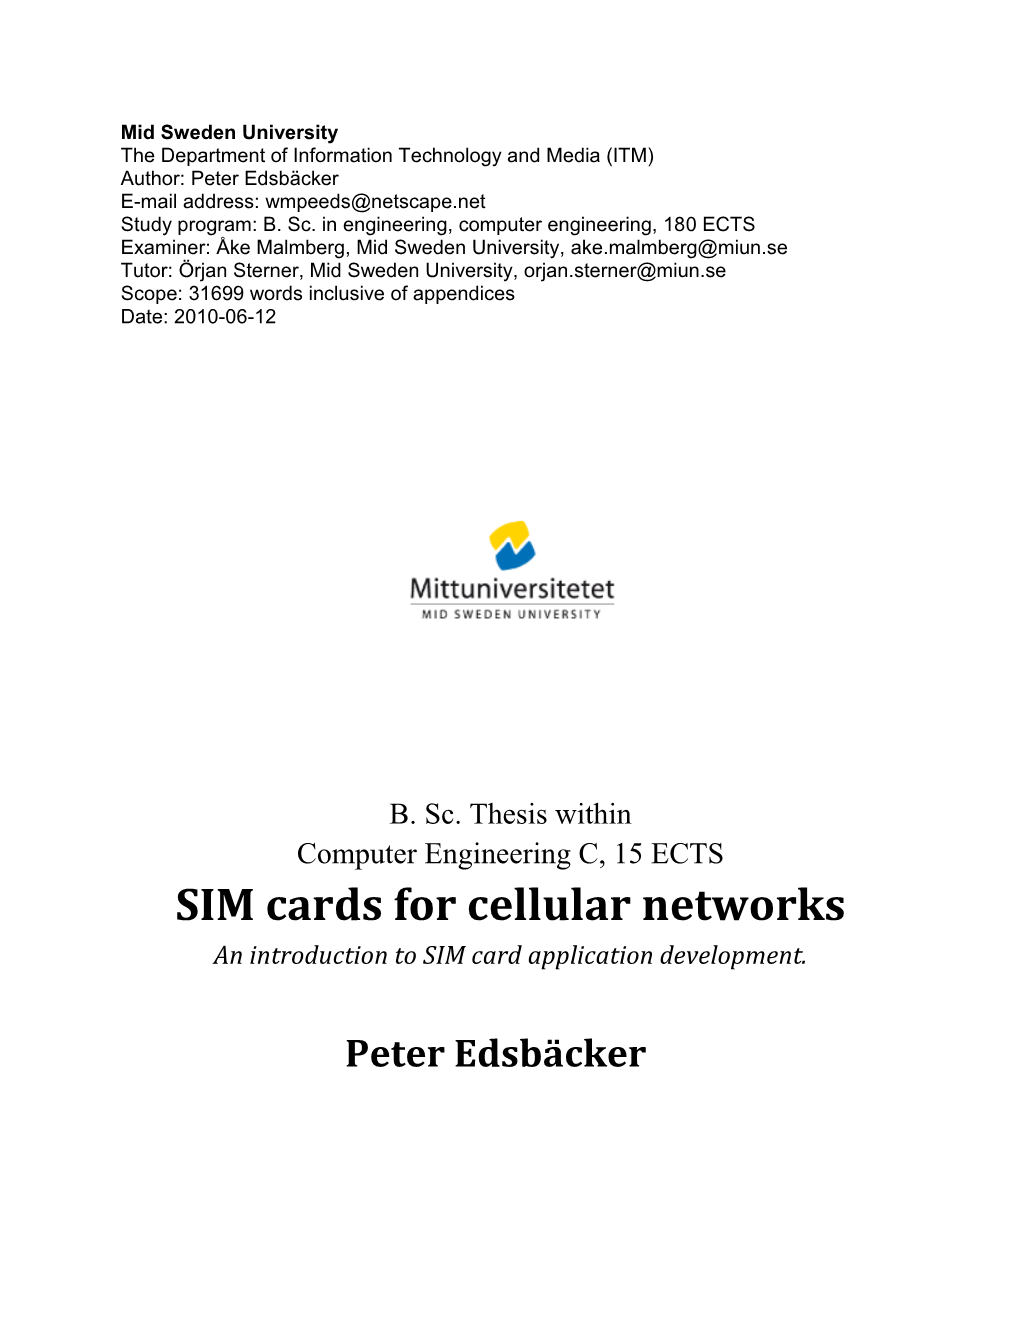 SIM Cards for Cellular Networks an Introduction to SIM Card Application Development